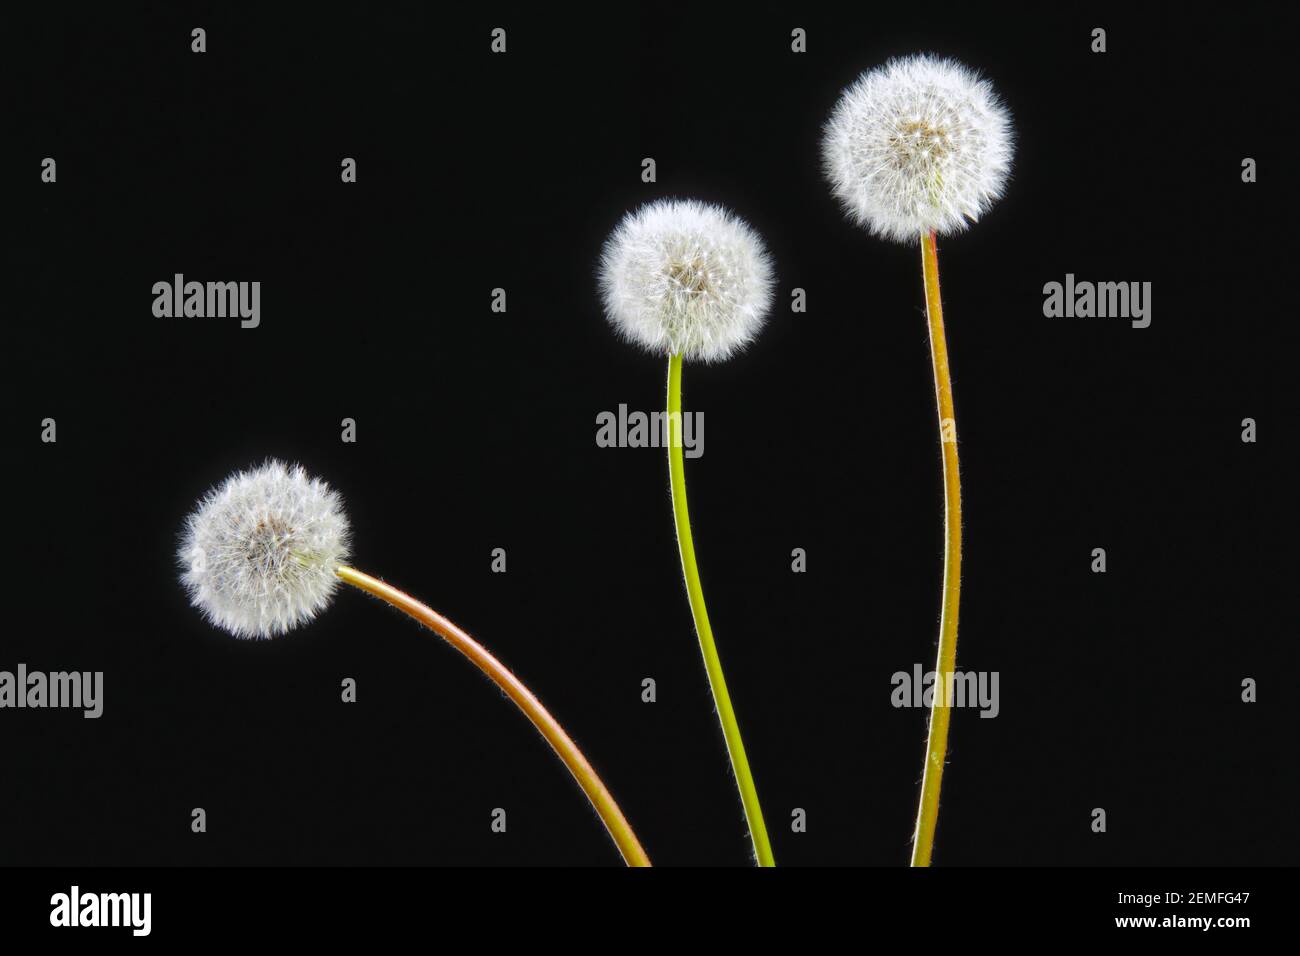 Three blooming fluffy white dandelions (taraxacum officinale)on a black background; isolated studio photo. Stock Photo